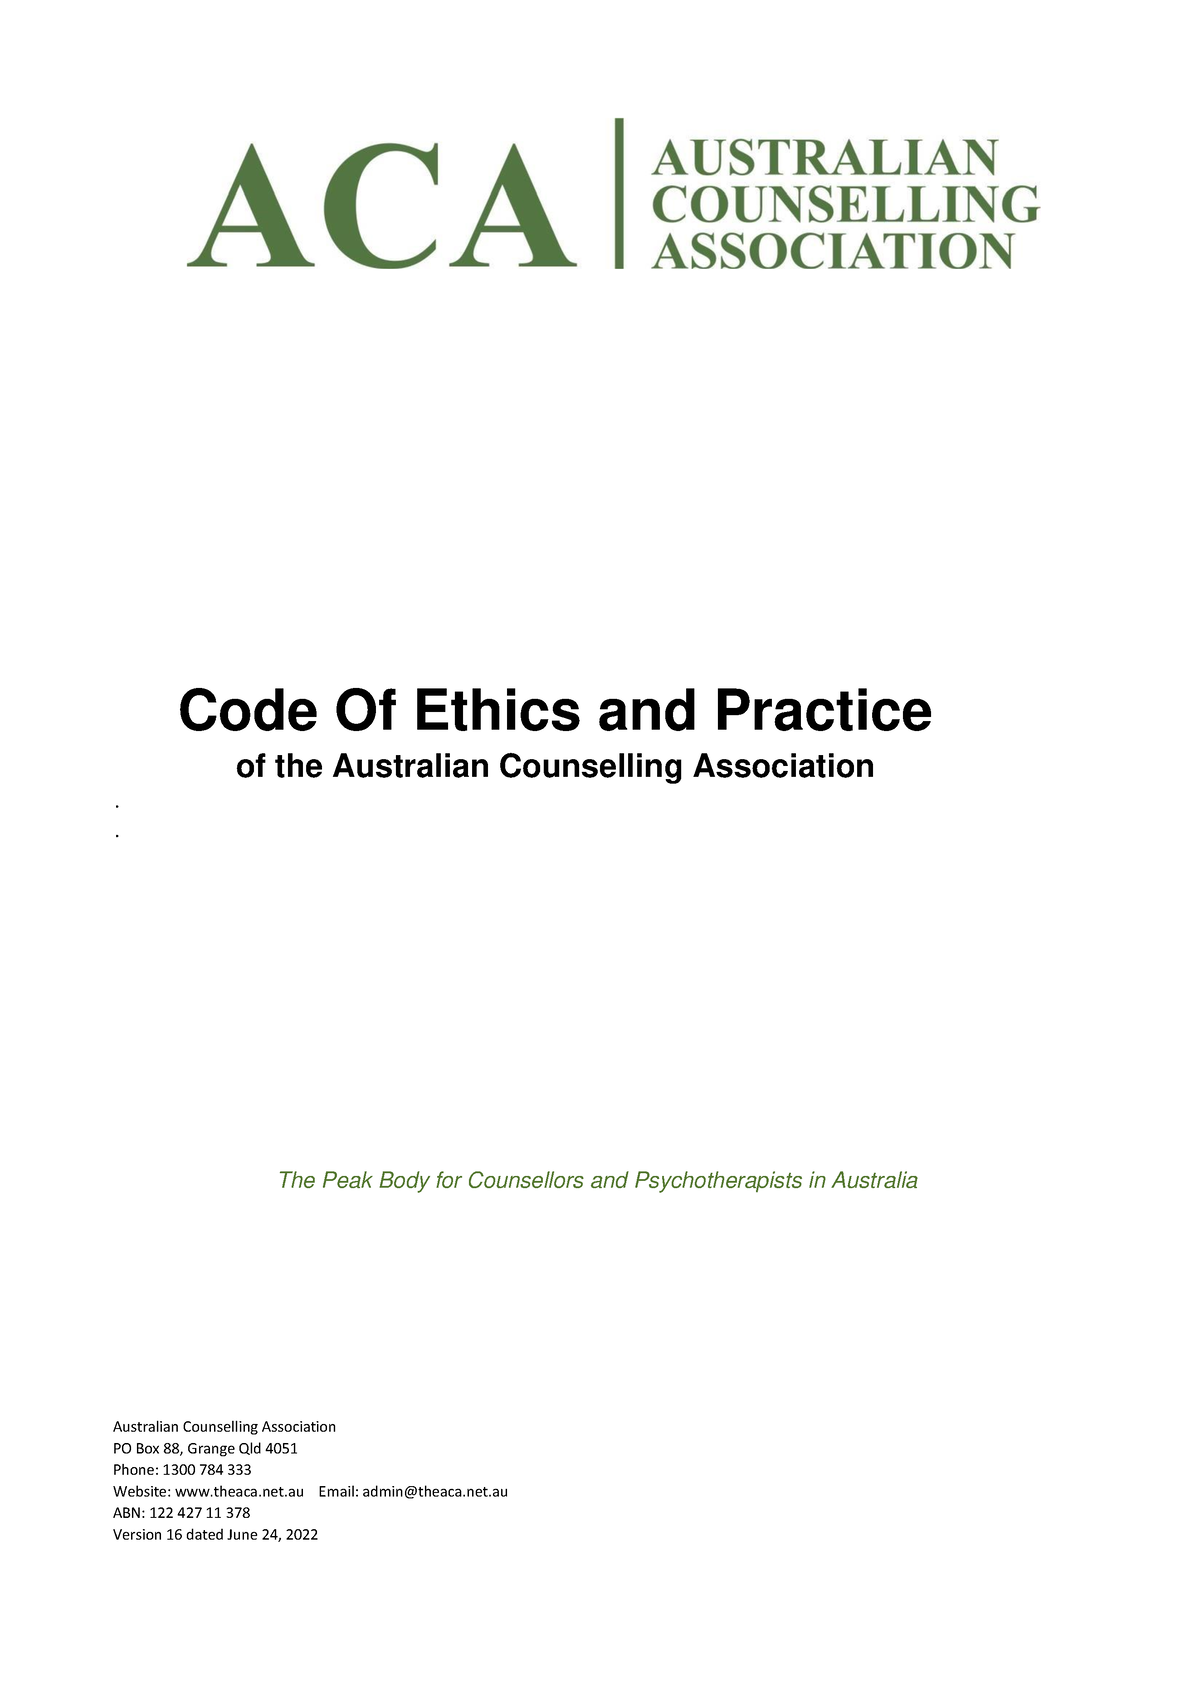 ACA Code of Ethics and Practice Ver16 of the Australian Counselling